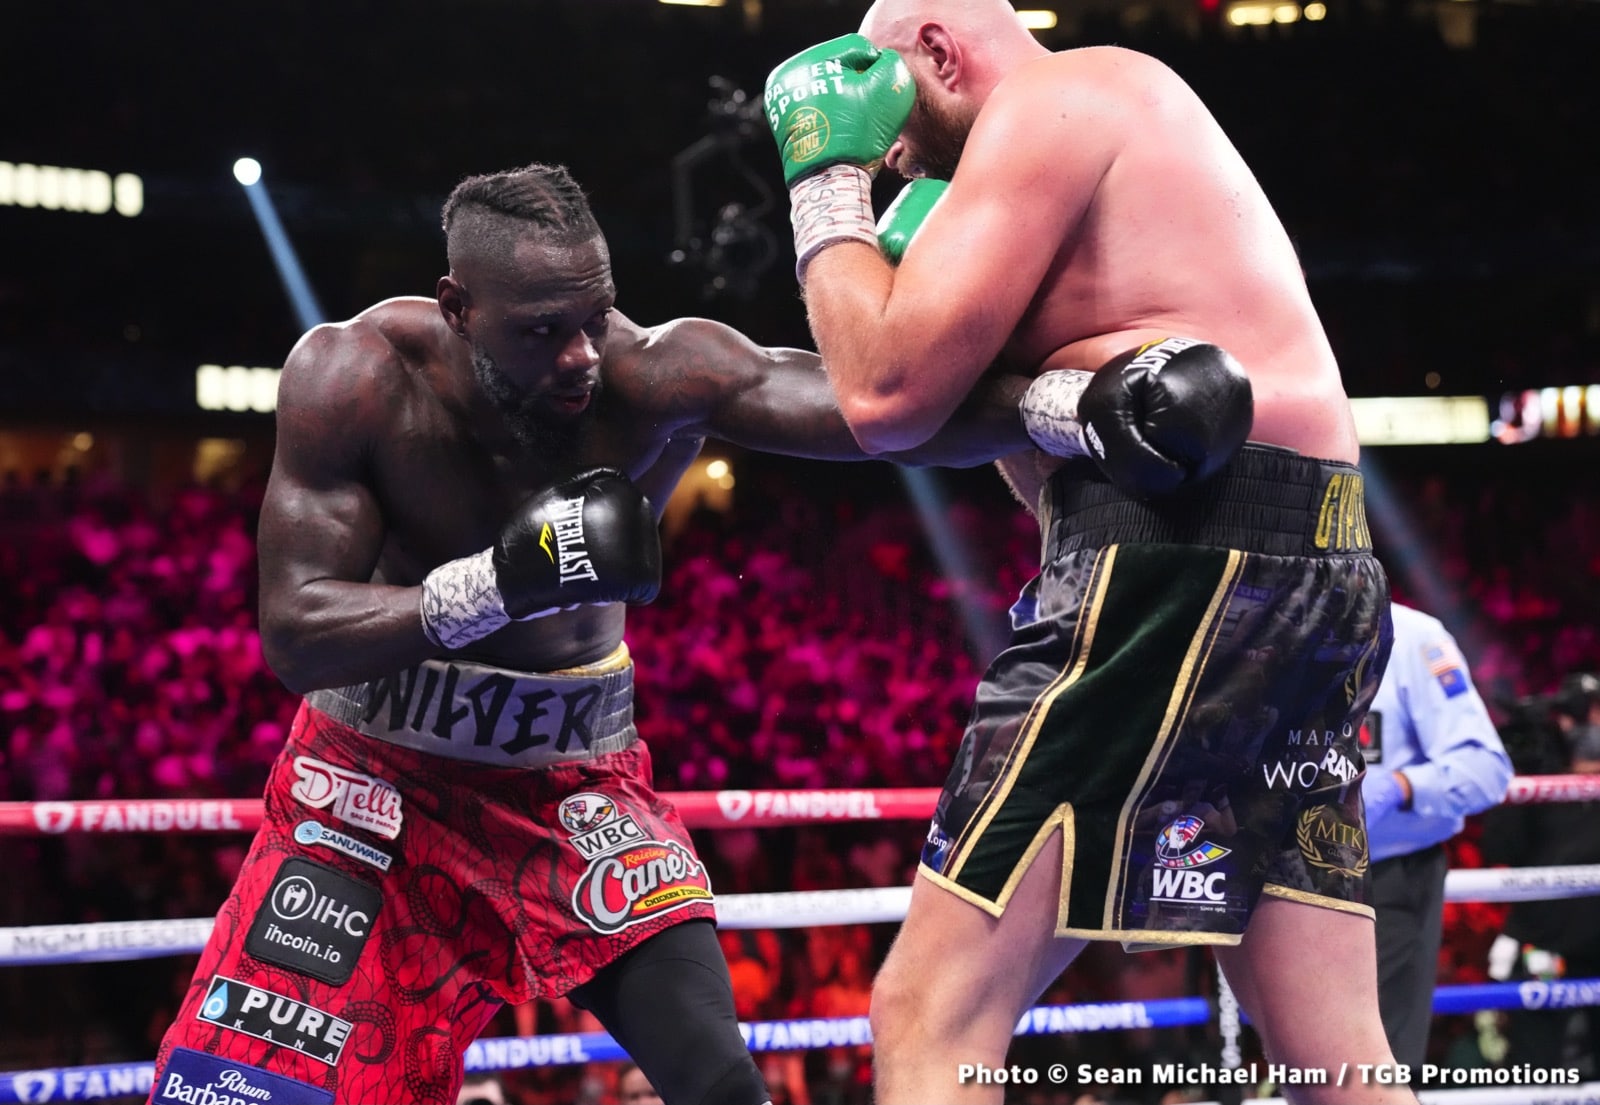 Image: Tim Bradley on Tyson Fury win over Deontay Wilder: 'The hate was real'